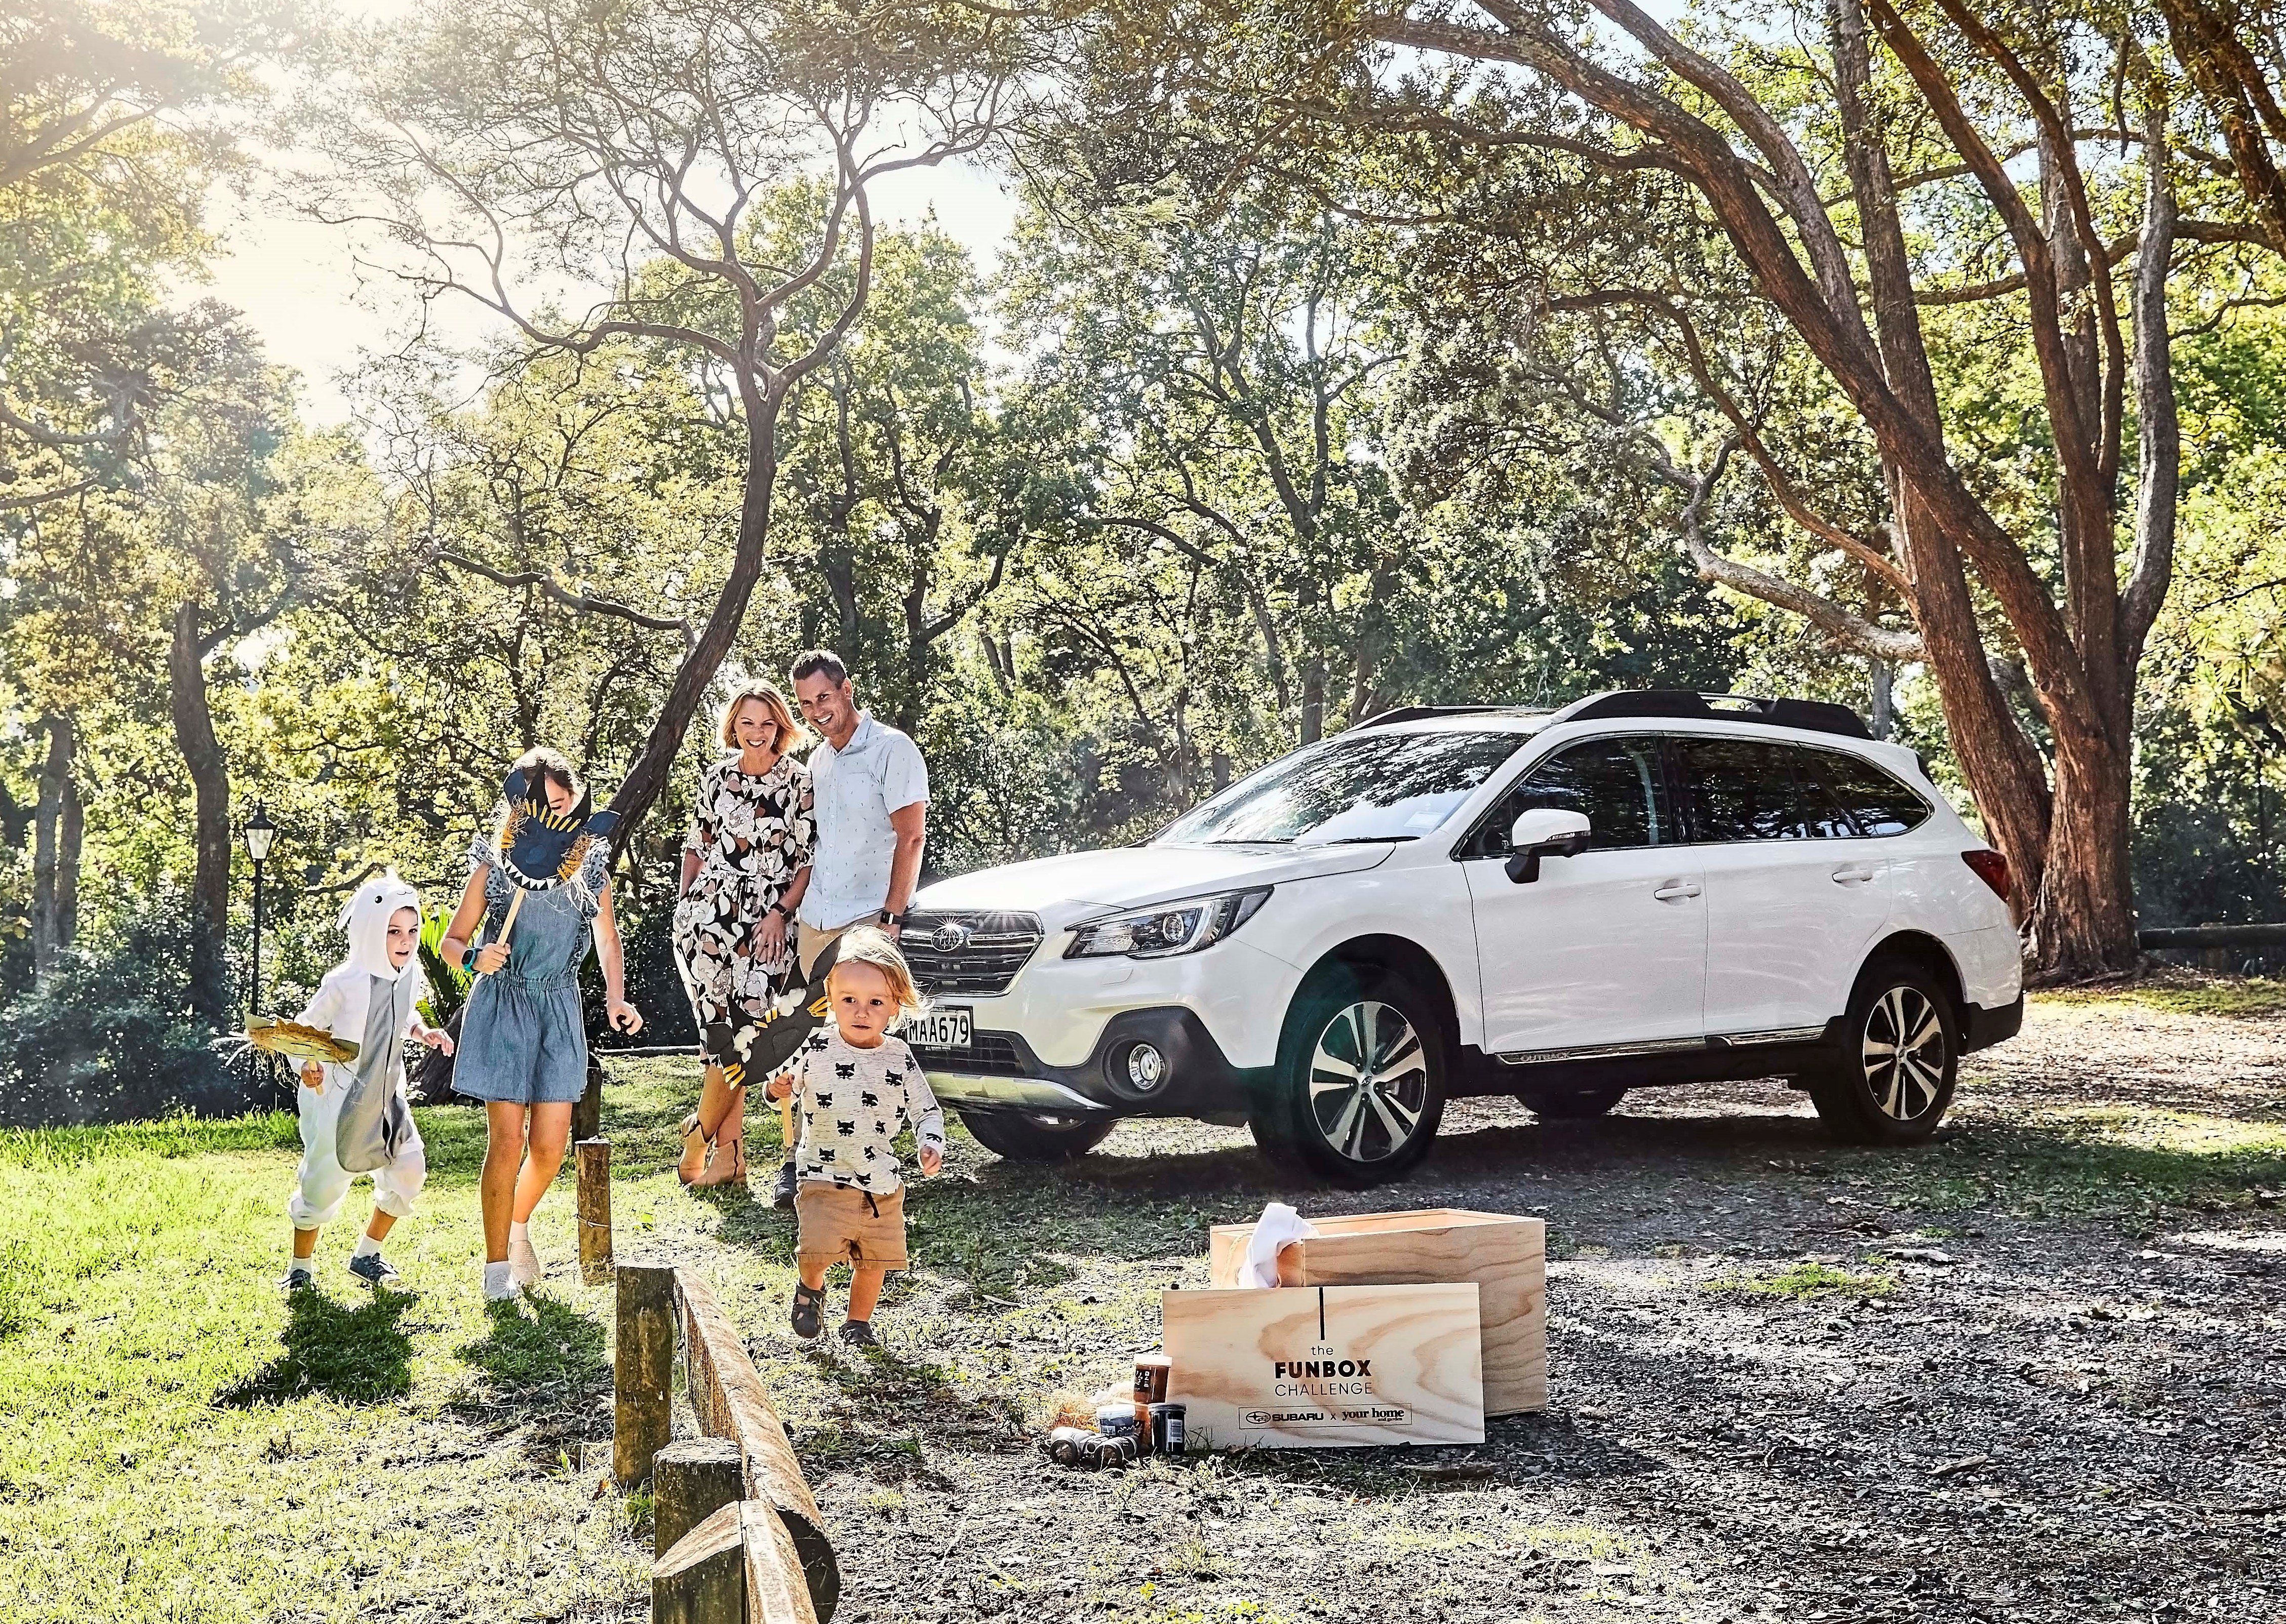 Subaru Outback is built for family adventures.